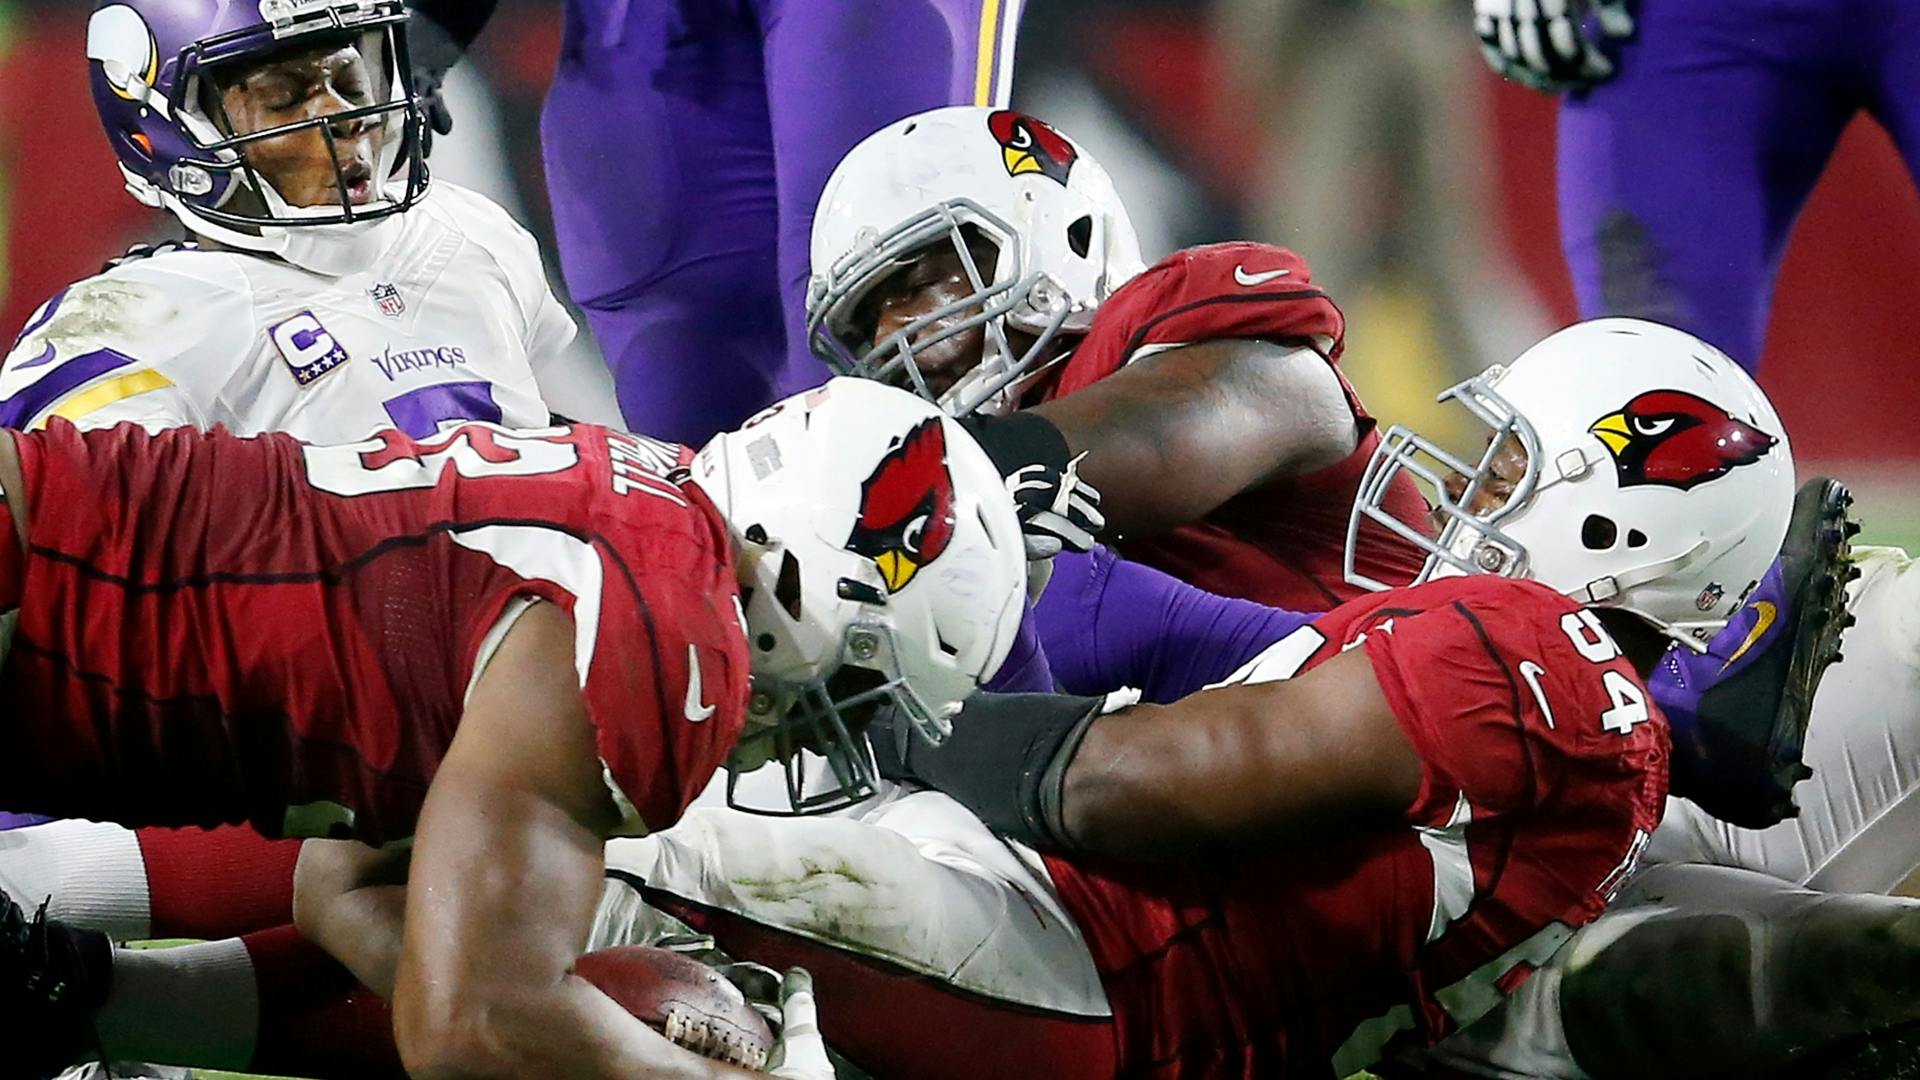 Bridgewater says despite the turnovers the team learned what it is capable of doing in Thursday's 23-20 loss to the Cardinals.